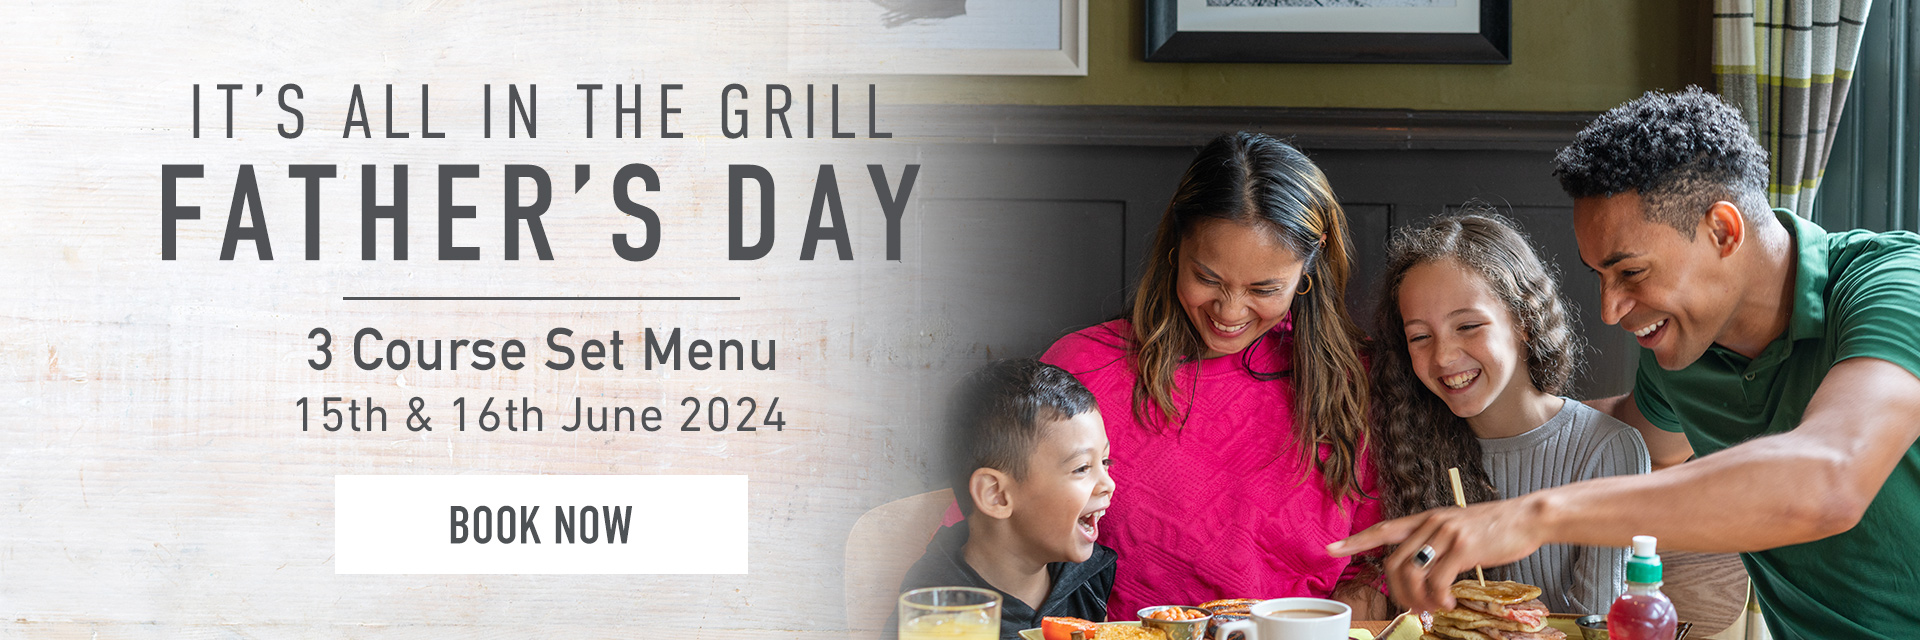 Father’s Day at The Durley Inn